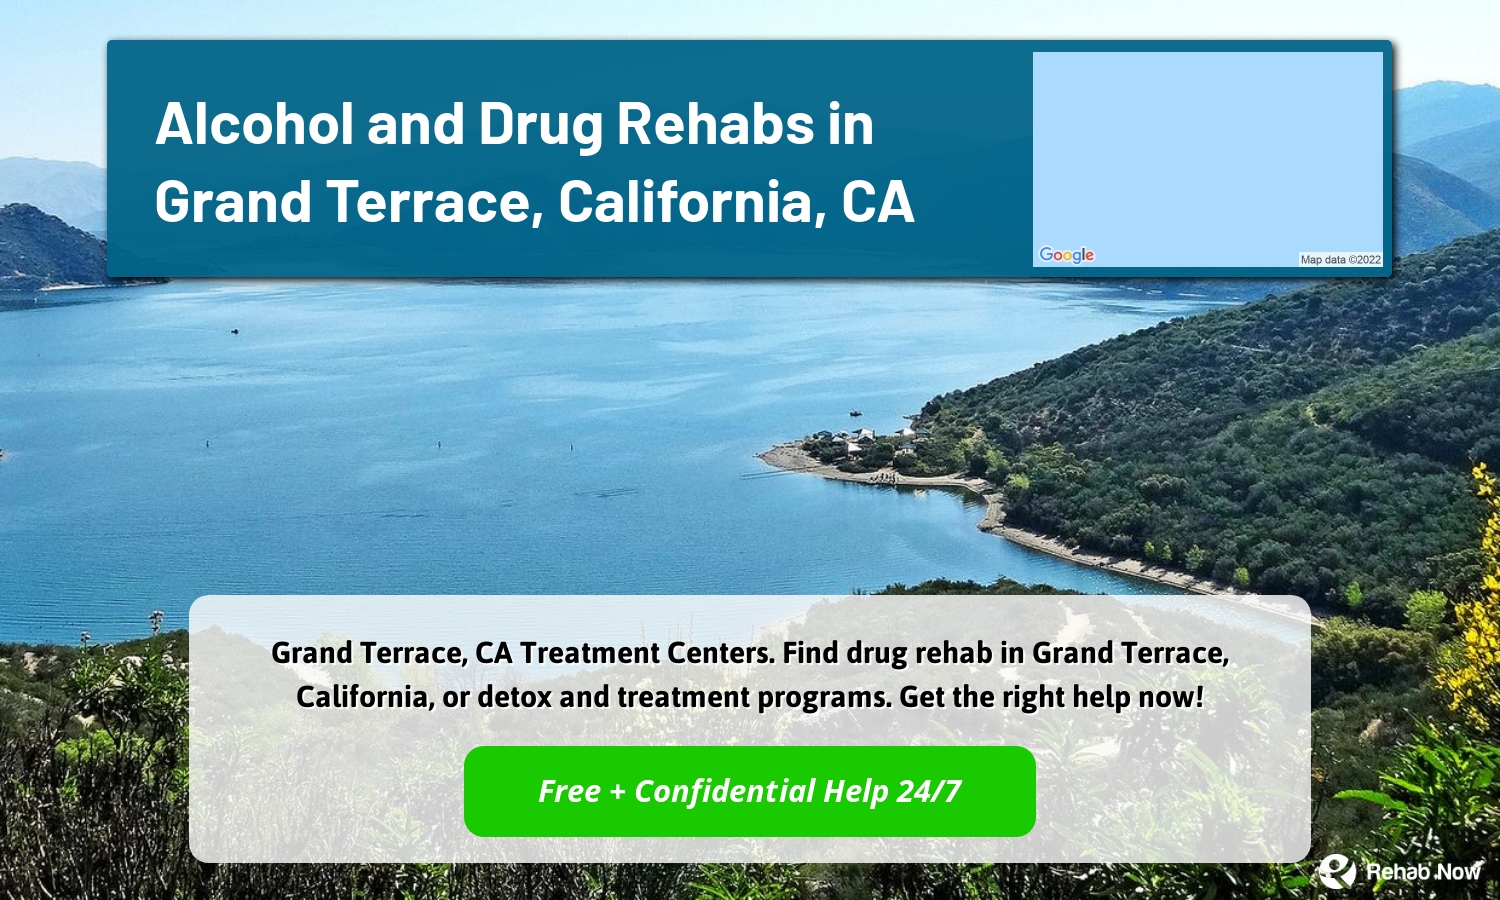 Grand Terrace, CA Treatment Centers. Find drug rehab in Grand Terrace, California, or detox and treatment programs. Get the right help now!